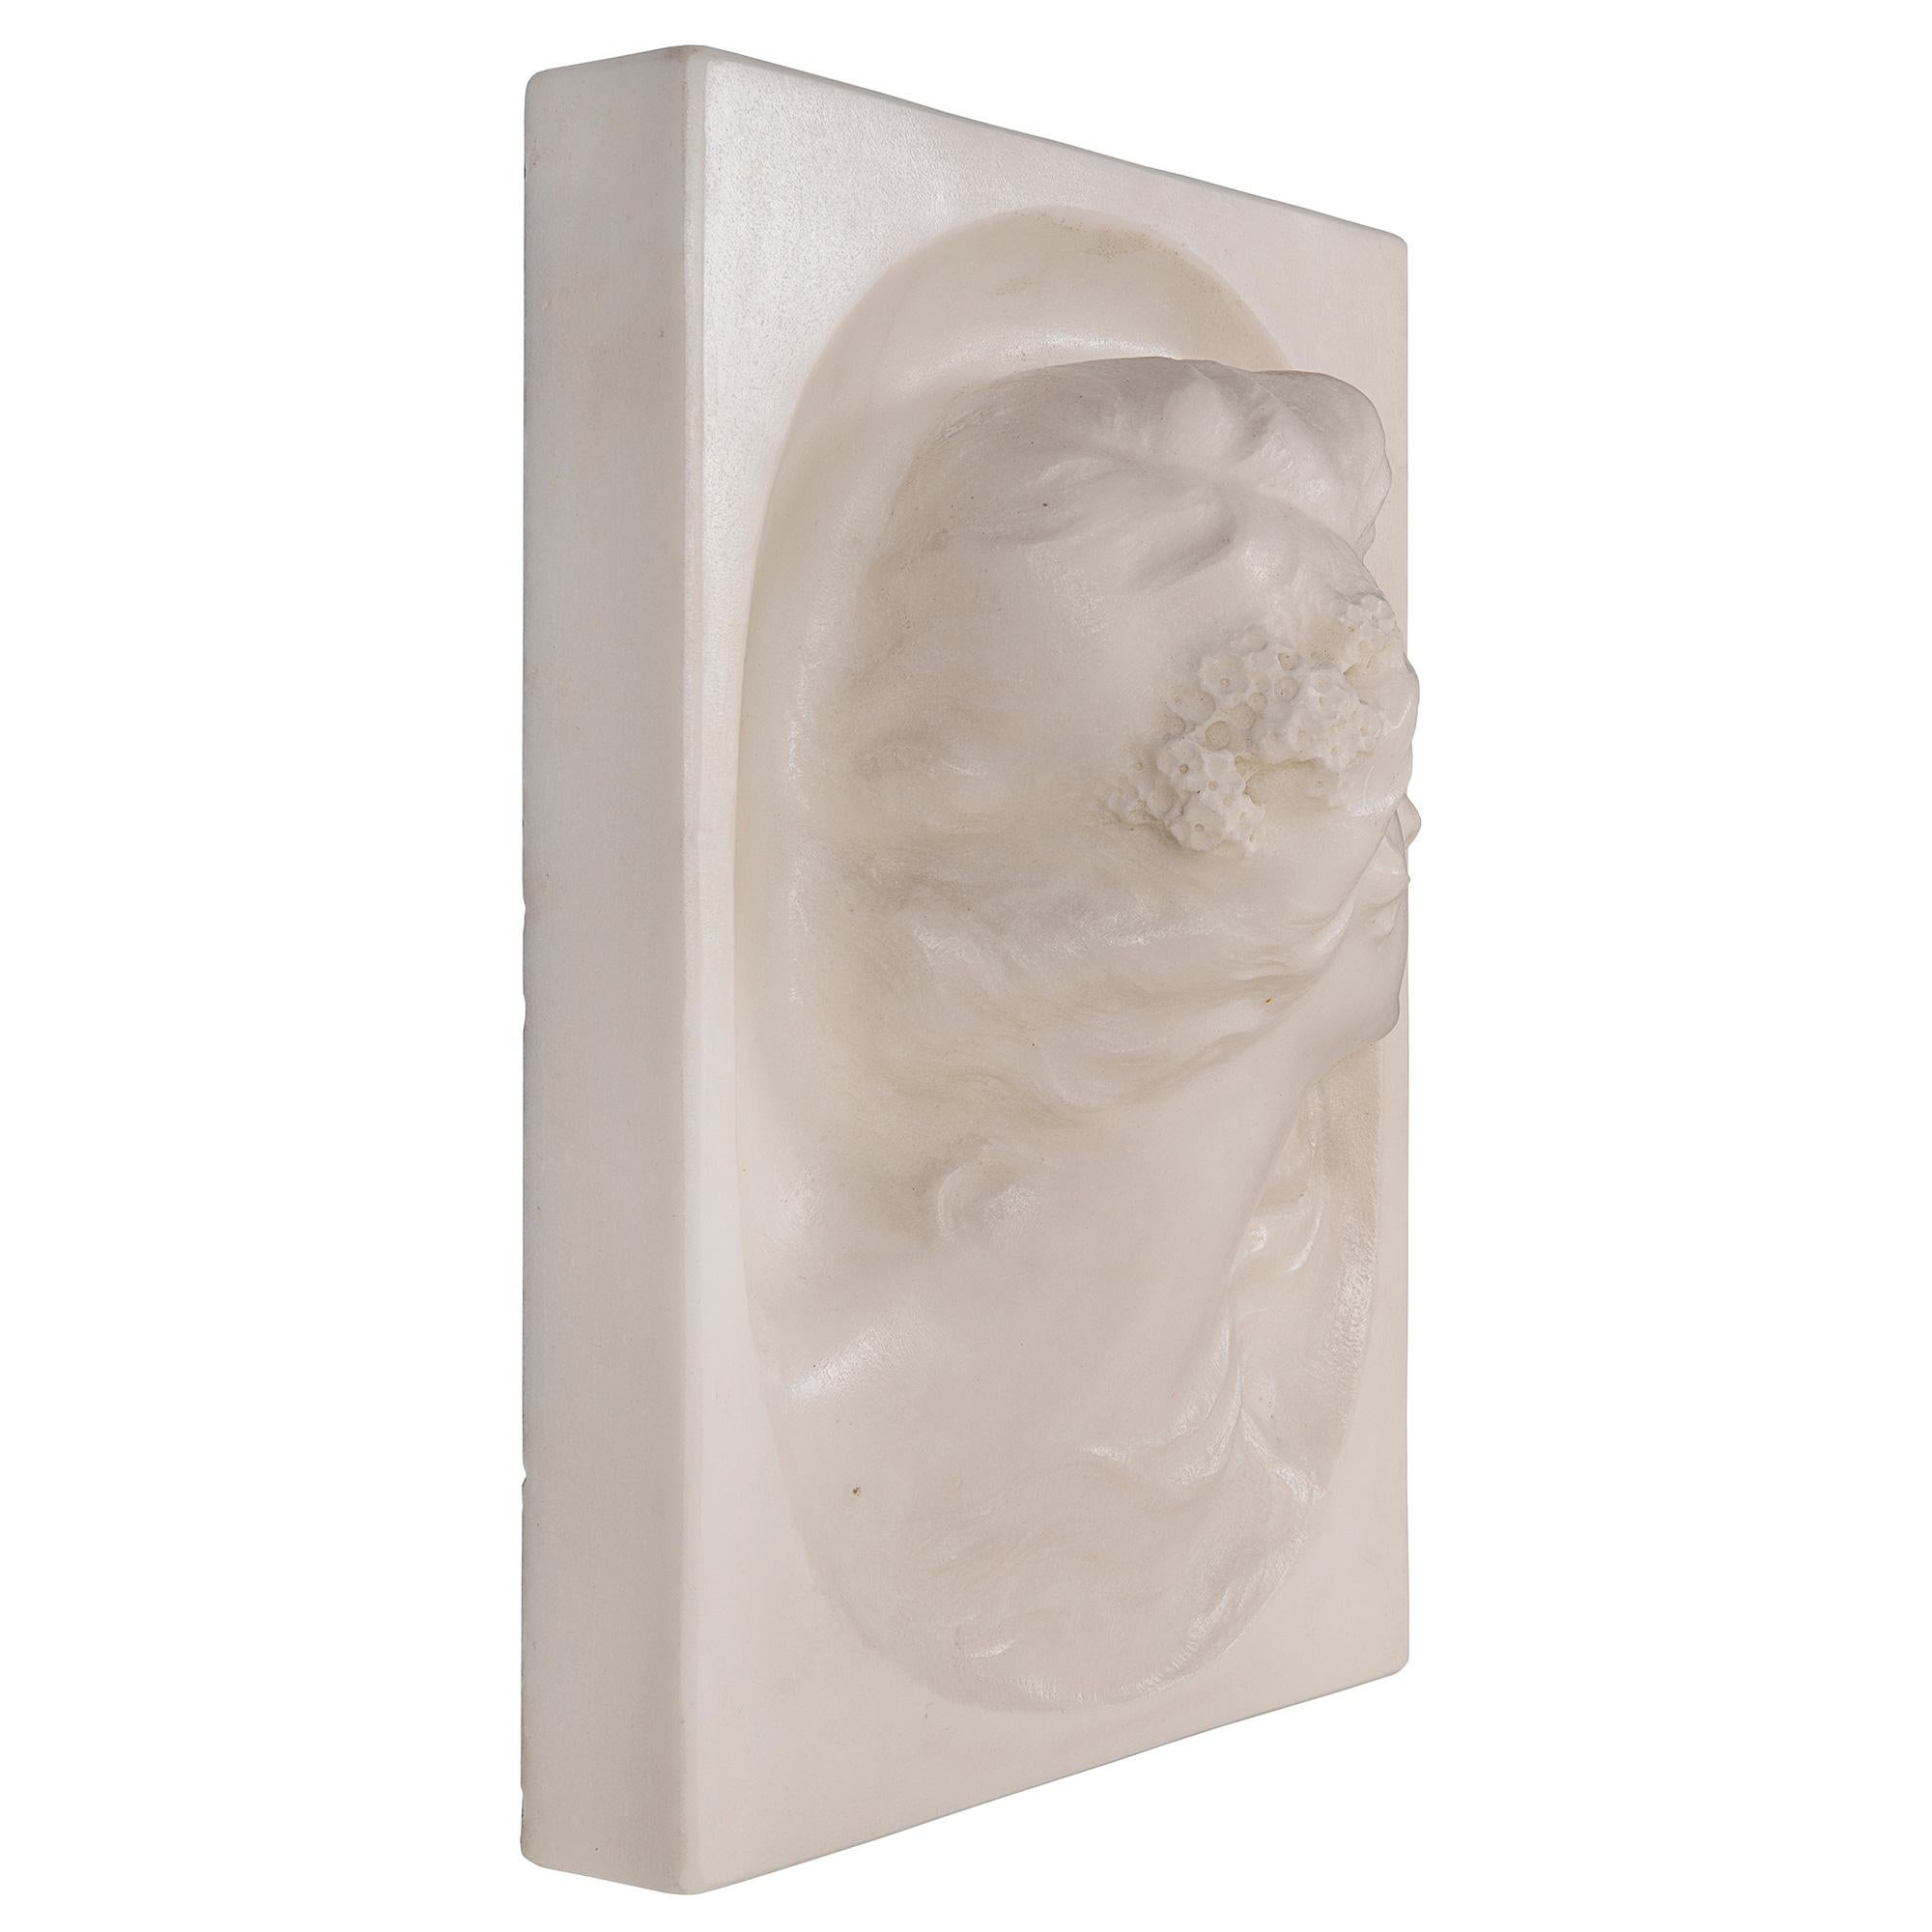 A striking and most decorative Italian 19th century white Carrara marble wall plaque. The rectangular plaque is centered by a beautiful richly sculpted maiden at the center with charming flowers in her hair. She looks to her left while her hair is